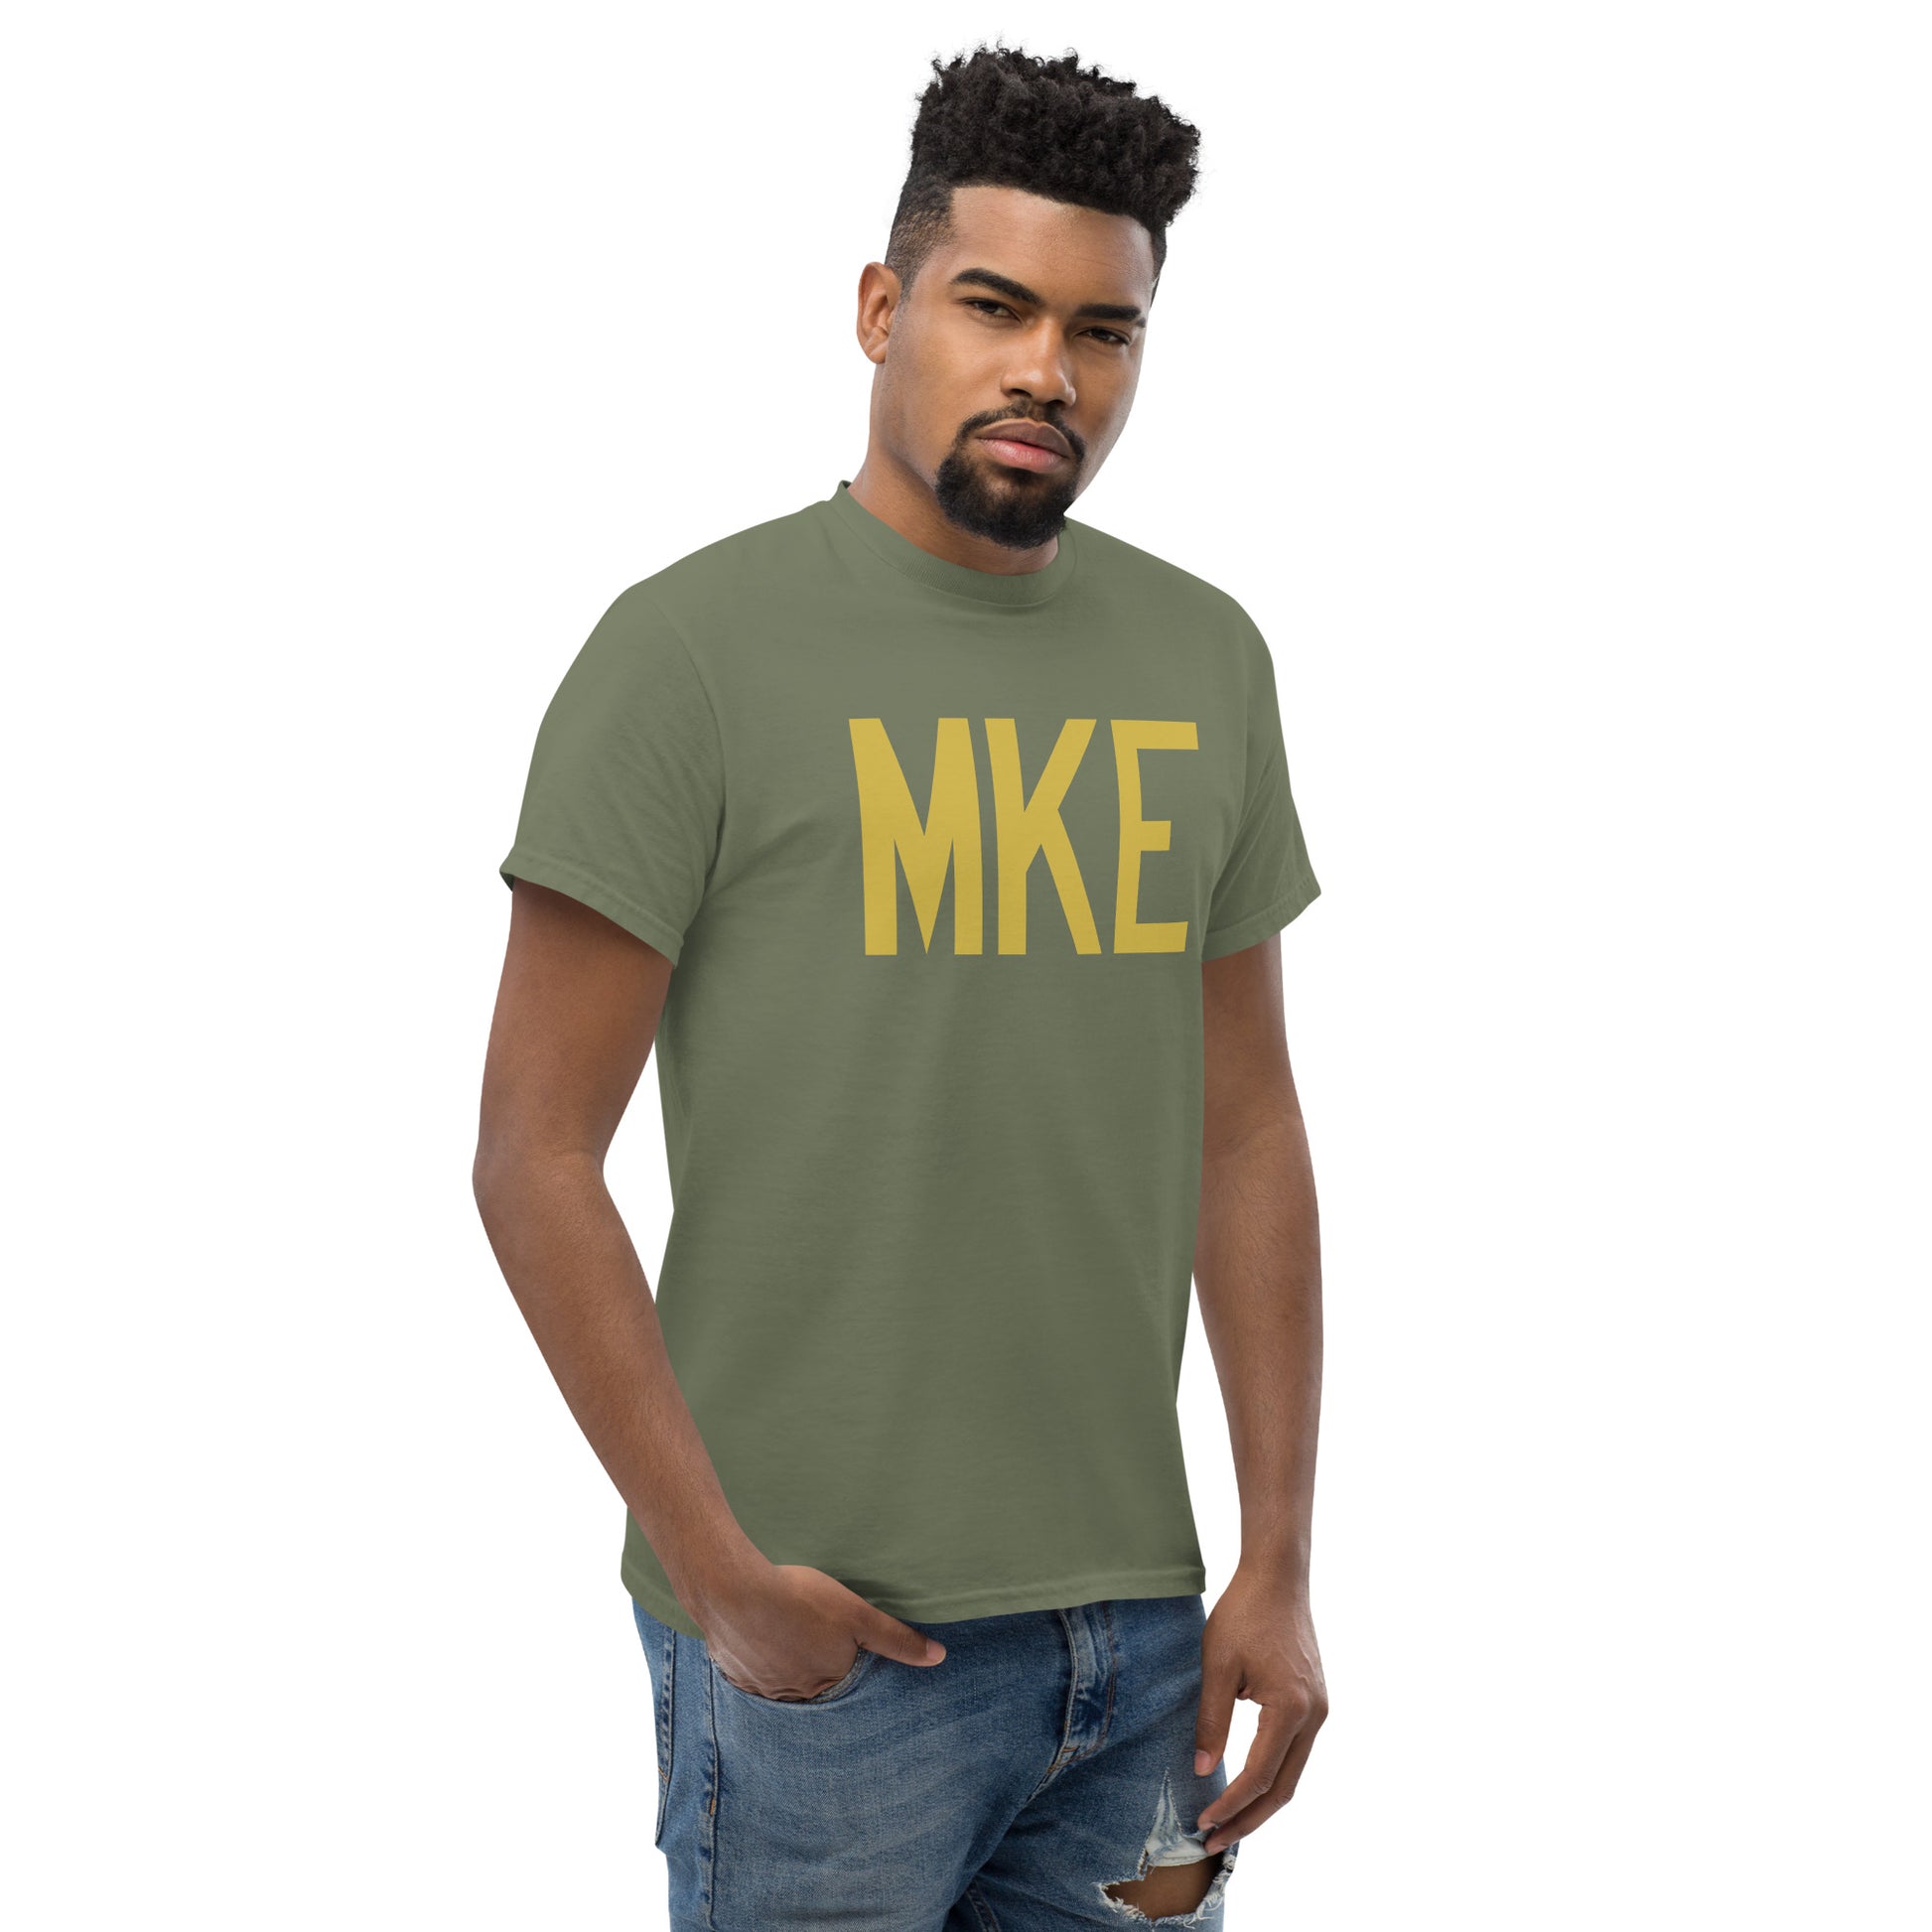 Aviation Enthusiast Men's Tee - Old Gold Graphic • MKE Milwaukee • YHM Designs - Image 08